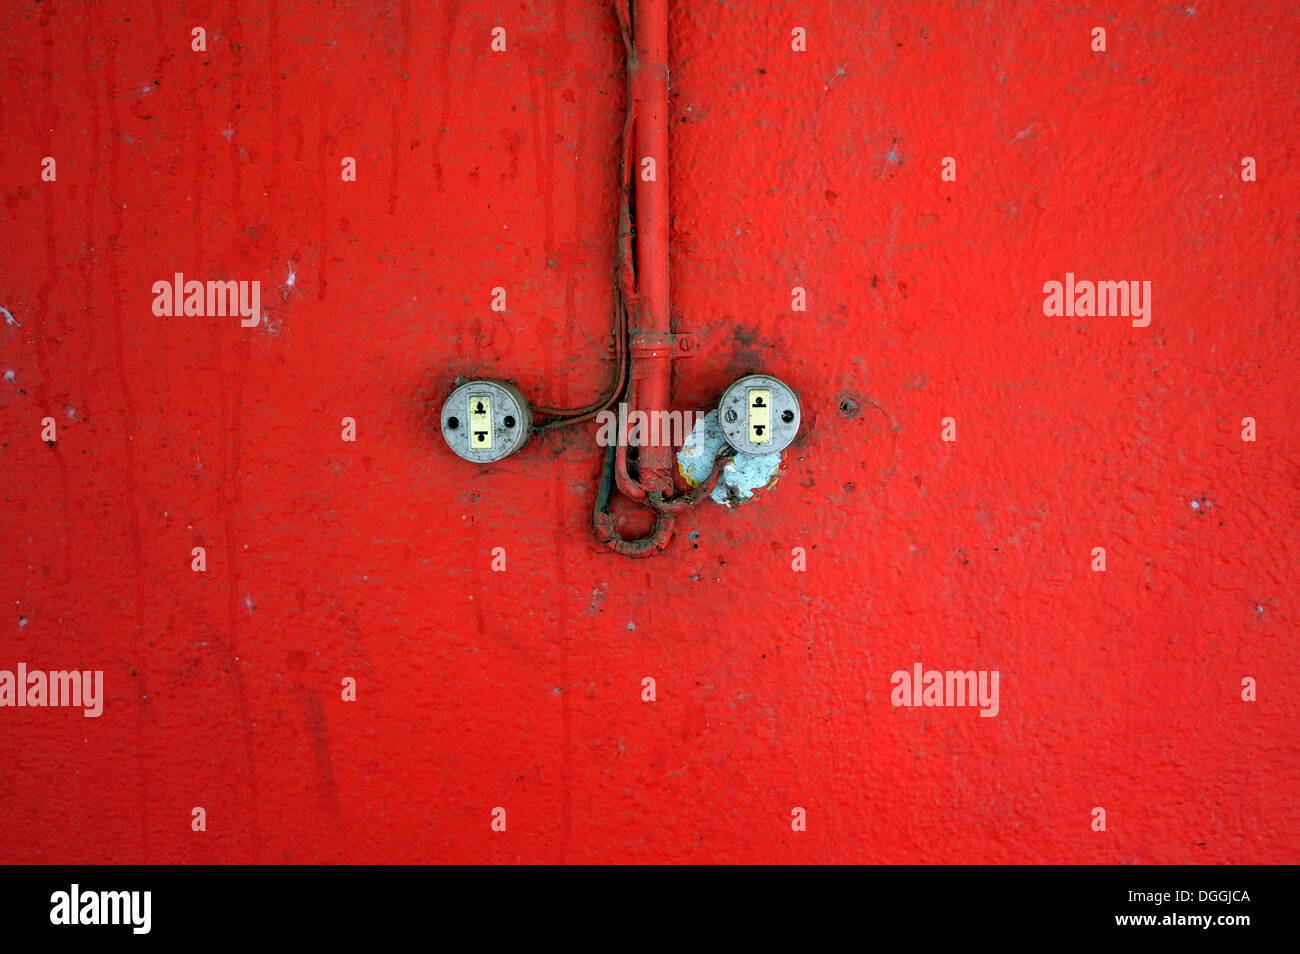 Shoddy electrical installation on a red wall Stock Photo